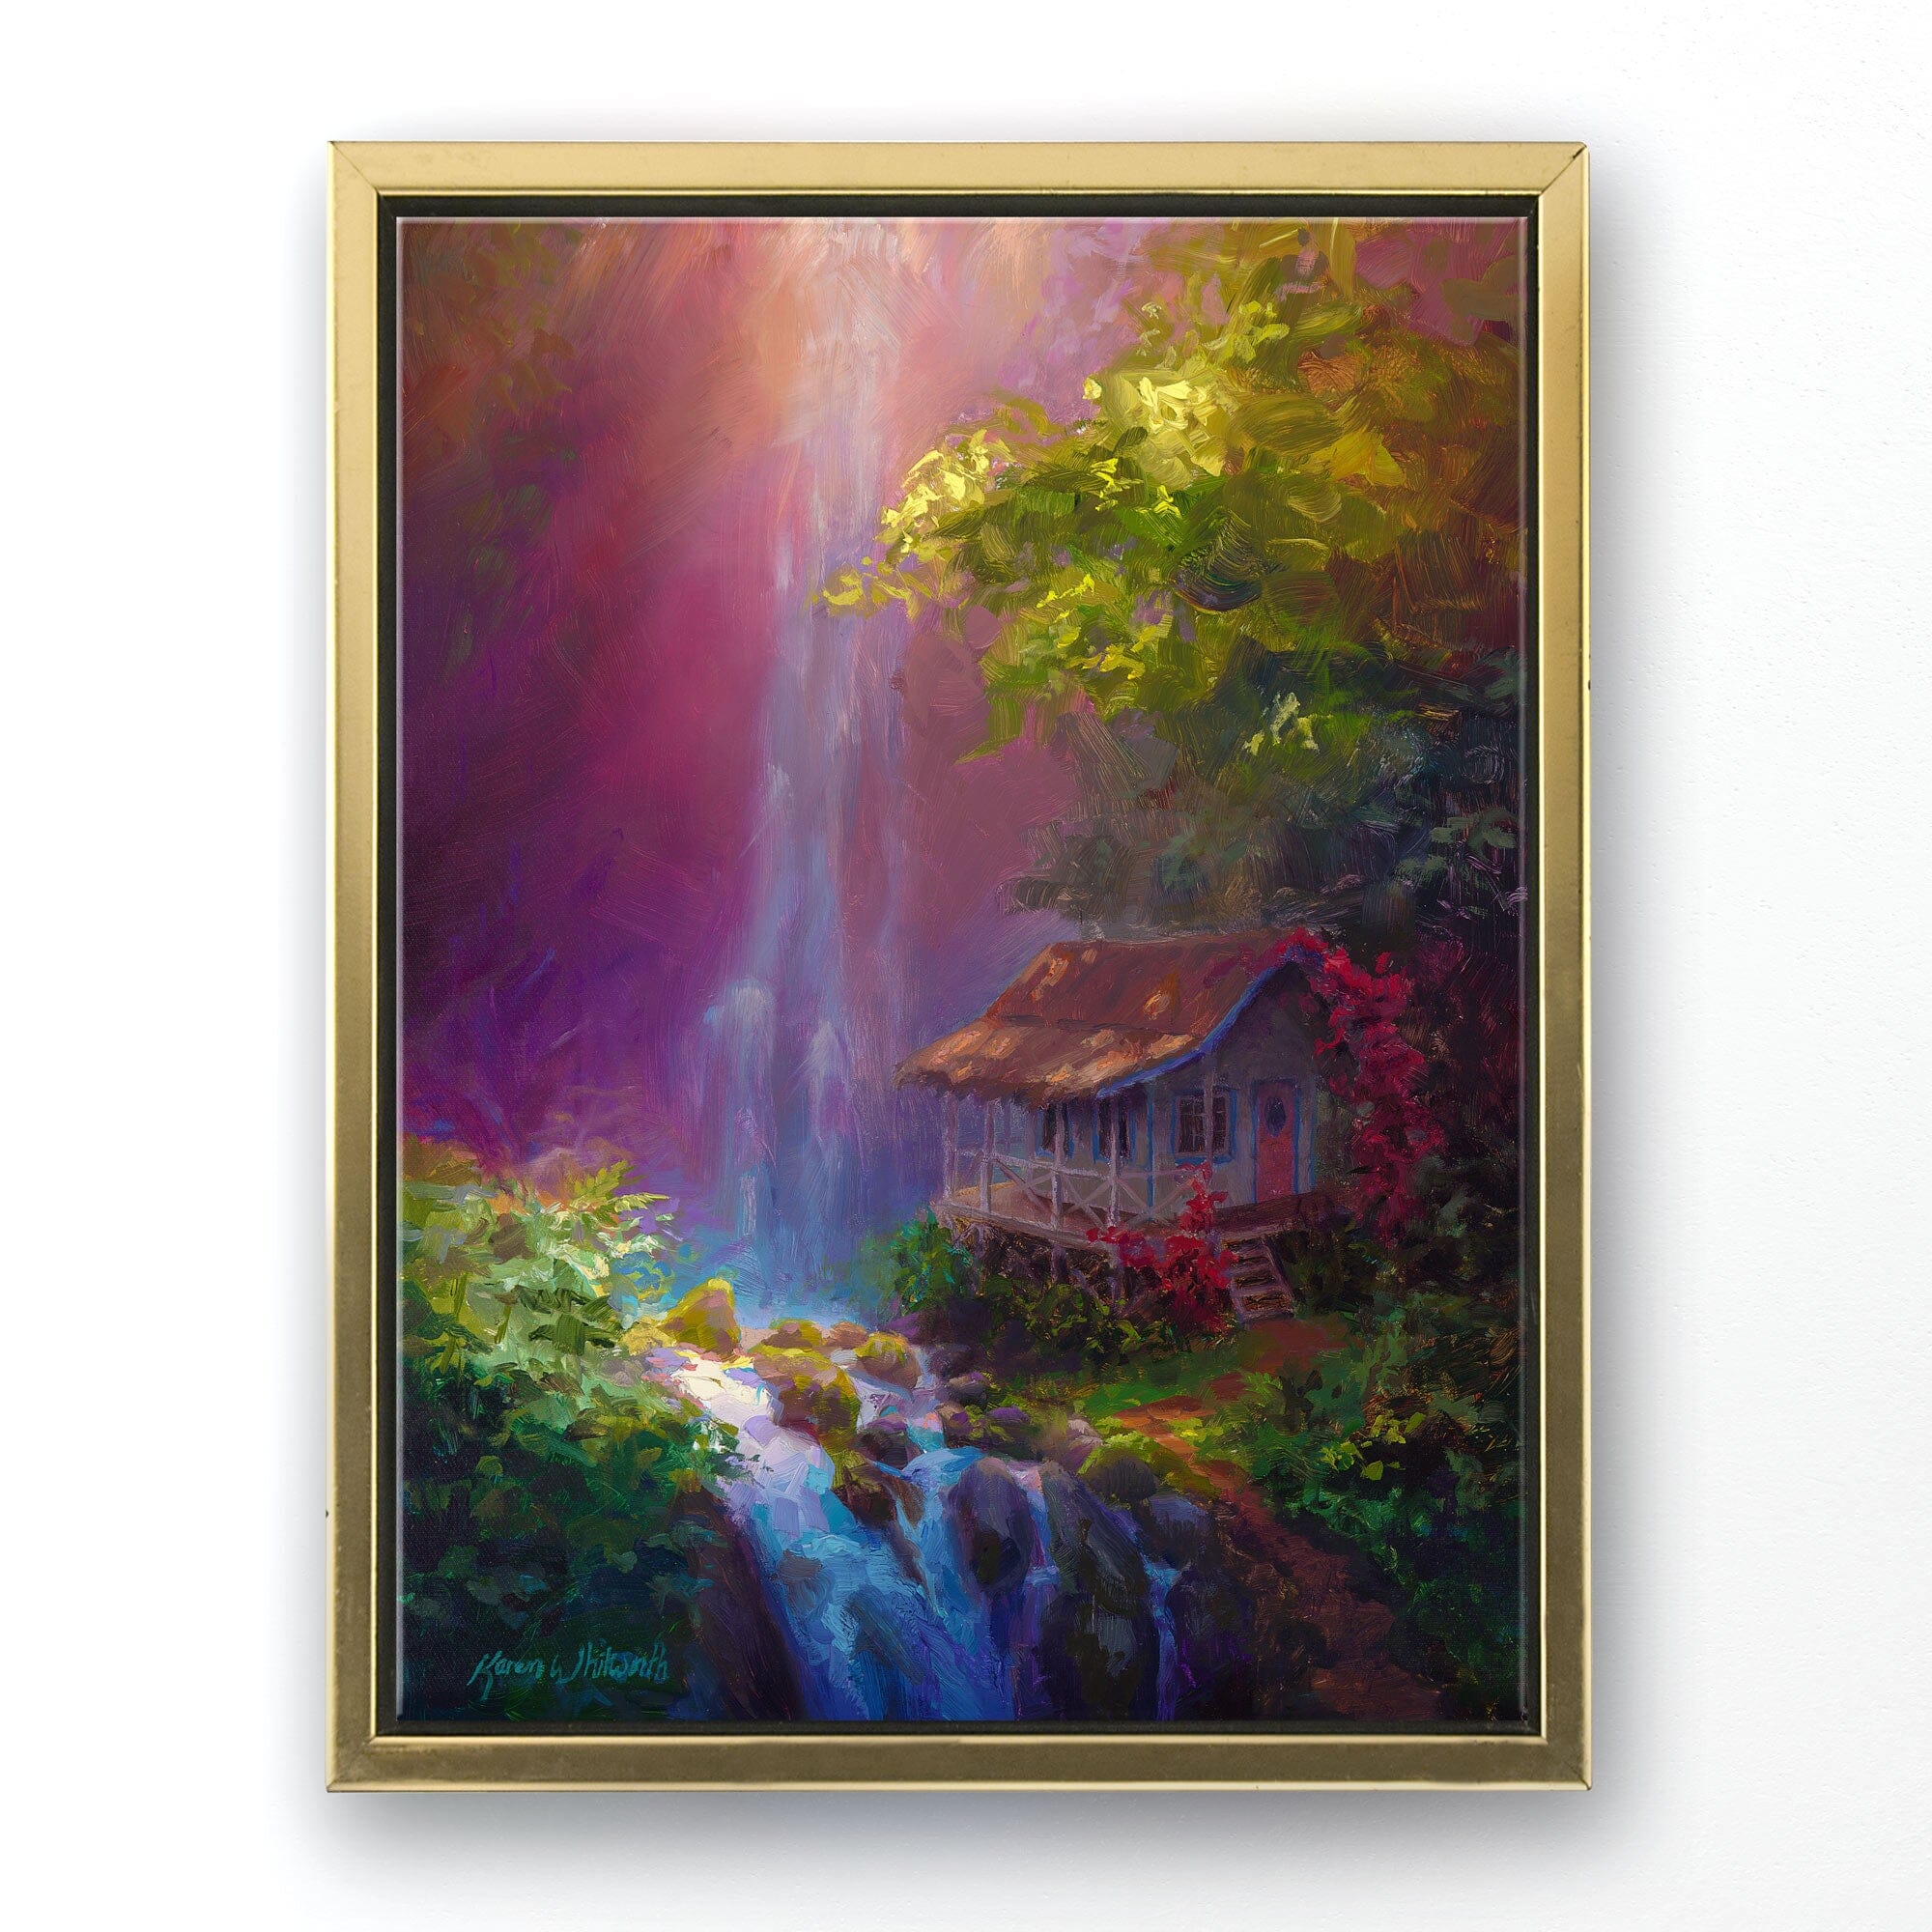 Landscape painting on canvas of Hawaiian waterfall by tropical artist Karen Whitworth titled "Healing Retreat". The canvas wall art is framed in a gold frame and is hanging on a white wall.